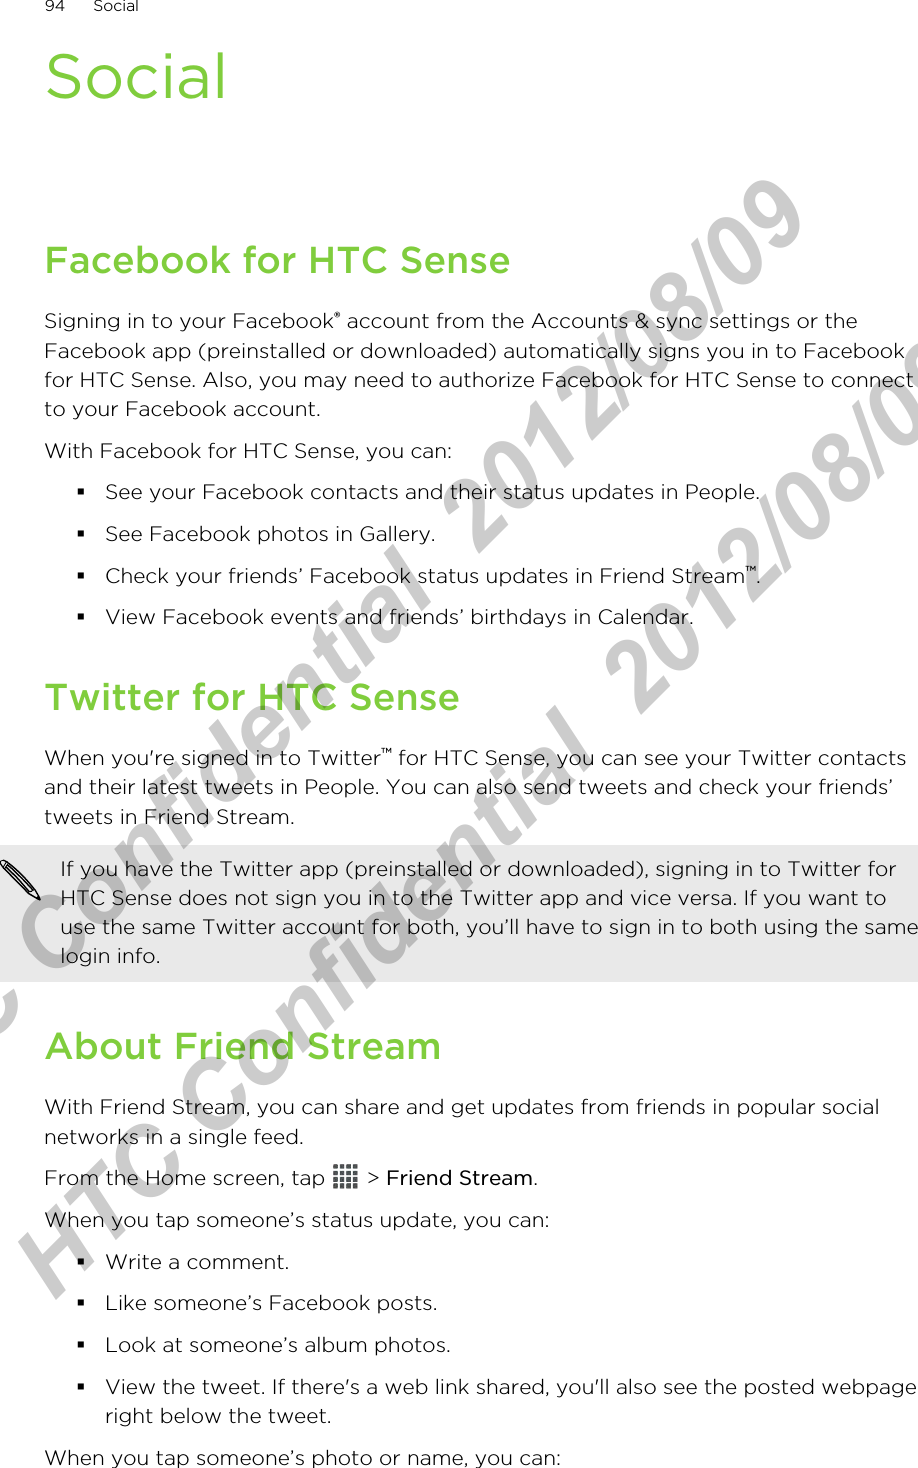 SocialFacebook for HTC SenseSigning in to your Facebook® account from the Accounts &amp; sync settings or theFacebook app (preinstalled or downloaded) automatically signs you in to Facebookfor HTC Sense. Also, you may need to authorize Facebook for HTC Sense to connectto your Facebook account.With Facebook for HTC Sense, you can:§See your Facebook contacts and their status updates in People.§See Facebook photos in Gallery.§Check your friends’ Facebook status updates in Friend Stream™.§View Facebook events and friends’ birthdays in Calendar.Twitter for HTC SenseWhen you&apos;re signed in to Twitter™ for HTC Sense, you can see your Twitter contactsand their latest tweets in People. You can also send tweets and check your friends’tweets in Friend Stream.If you have the Twitter app (preinstalled or downloaded), signing in to Twitter forHTC Sense does not sign you in to the Twitter app and vice versa. If you want touse the same Twitter account for both, you’ll have to sign in to both using the samelogin info.About Friend StreamWith Friend Stream, you can share and get updates from friends in popular socialnetworks in a single feed.From the Home screen, tap   &gt; Friend Stream.When you tap someone’s status update, you can:§Write a comment.§Like someone’s Facebook posts.§Look at someone’s album photos.§View the tweet. If there&apos;s a web link shared, you&apos;ll also see the posted webpageright below the tweet.When you tap someone’s photo or name, you can:94 SocialHTC Confidential  2012/08/09  HTC Confidential  2012/08/09 